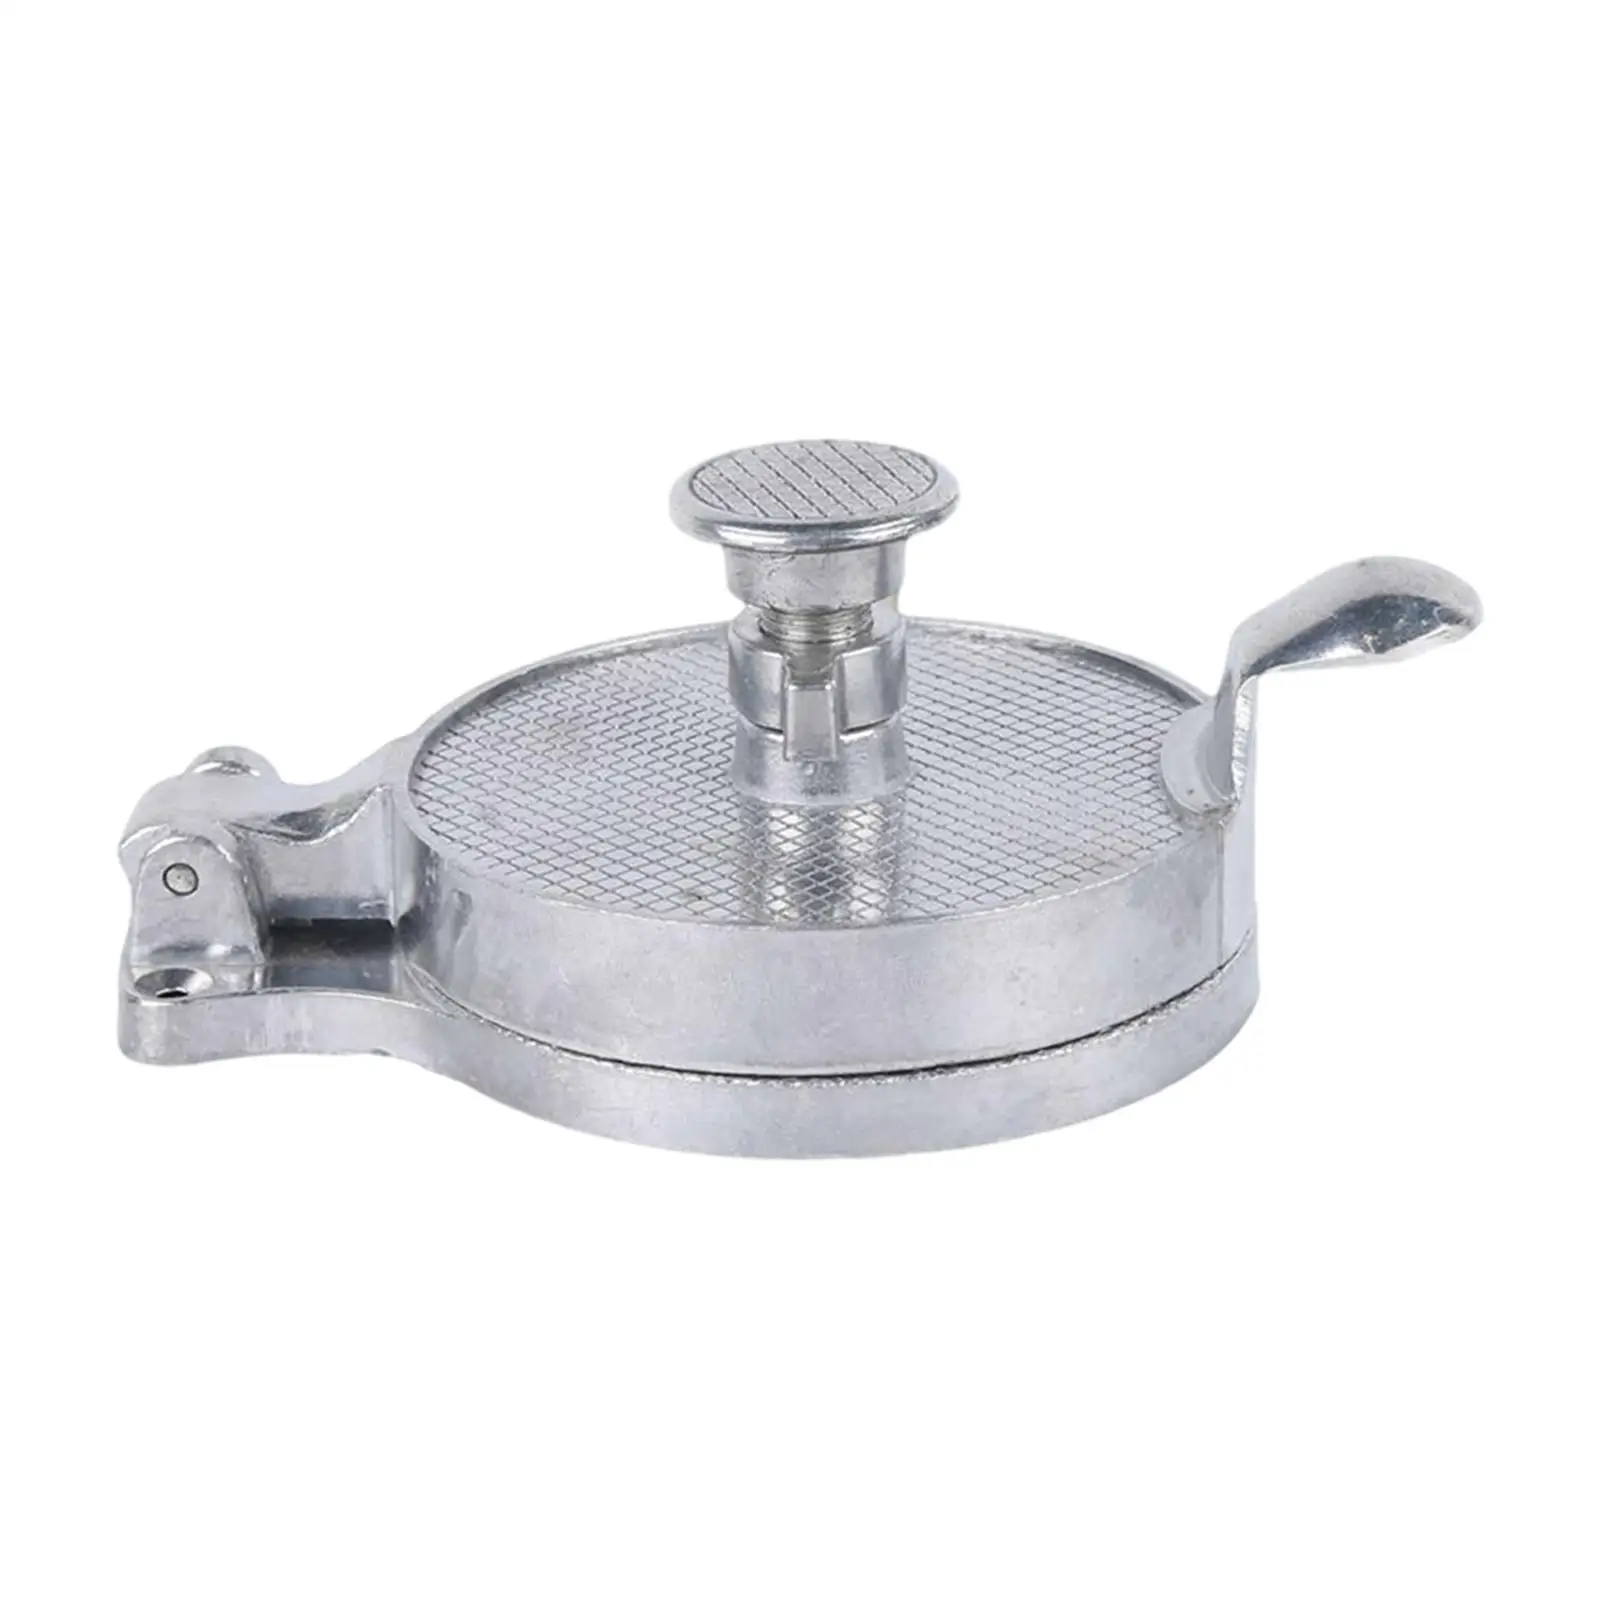 Round Burger Presses Smooth Nonstick Professional Grill Cooking Smasher Hamburger Patty Maker for Sandwiches Barbecue Flatbreads